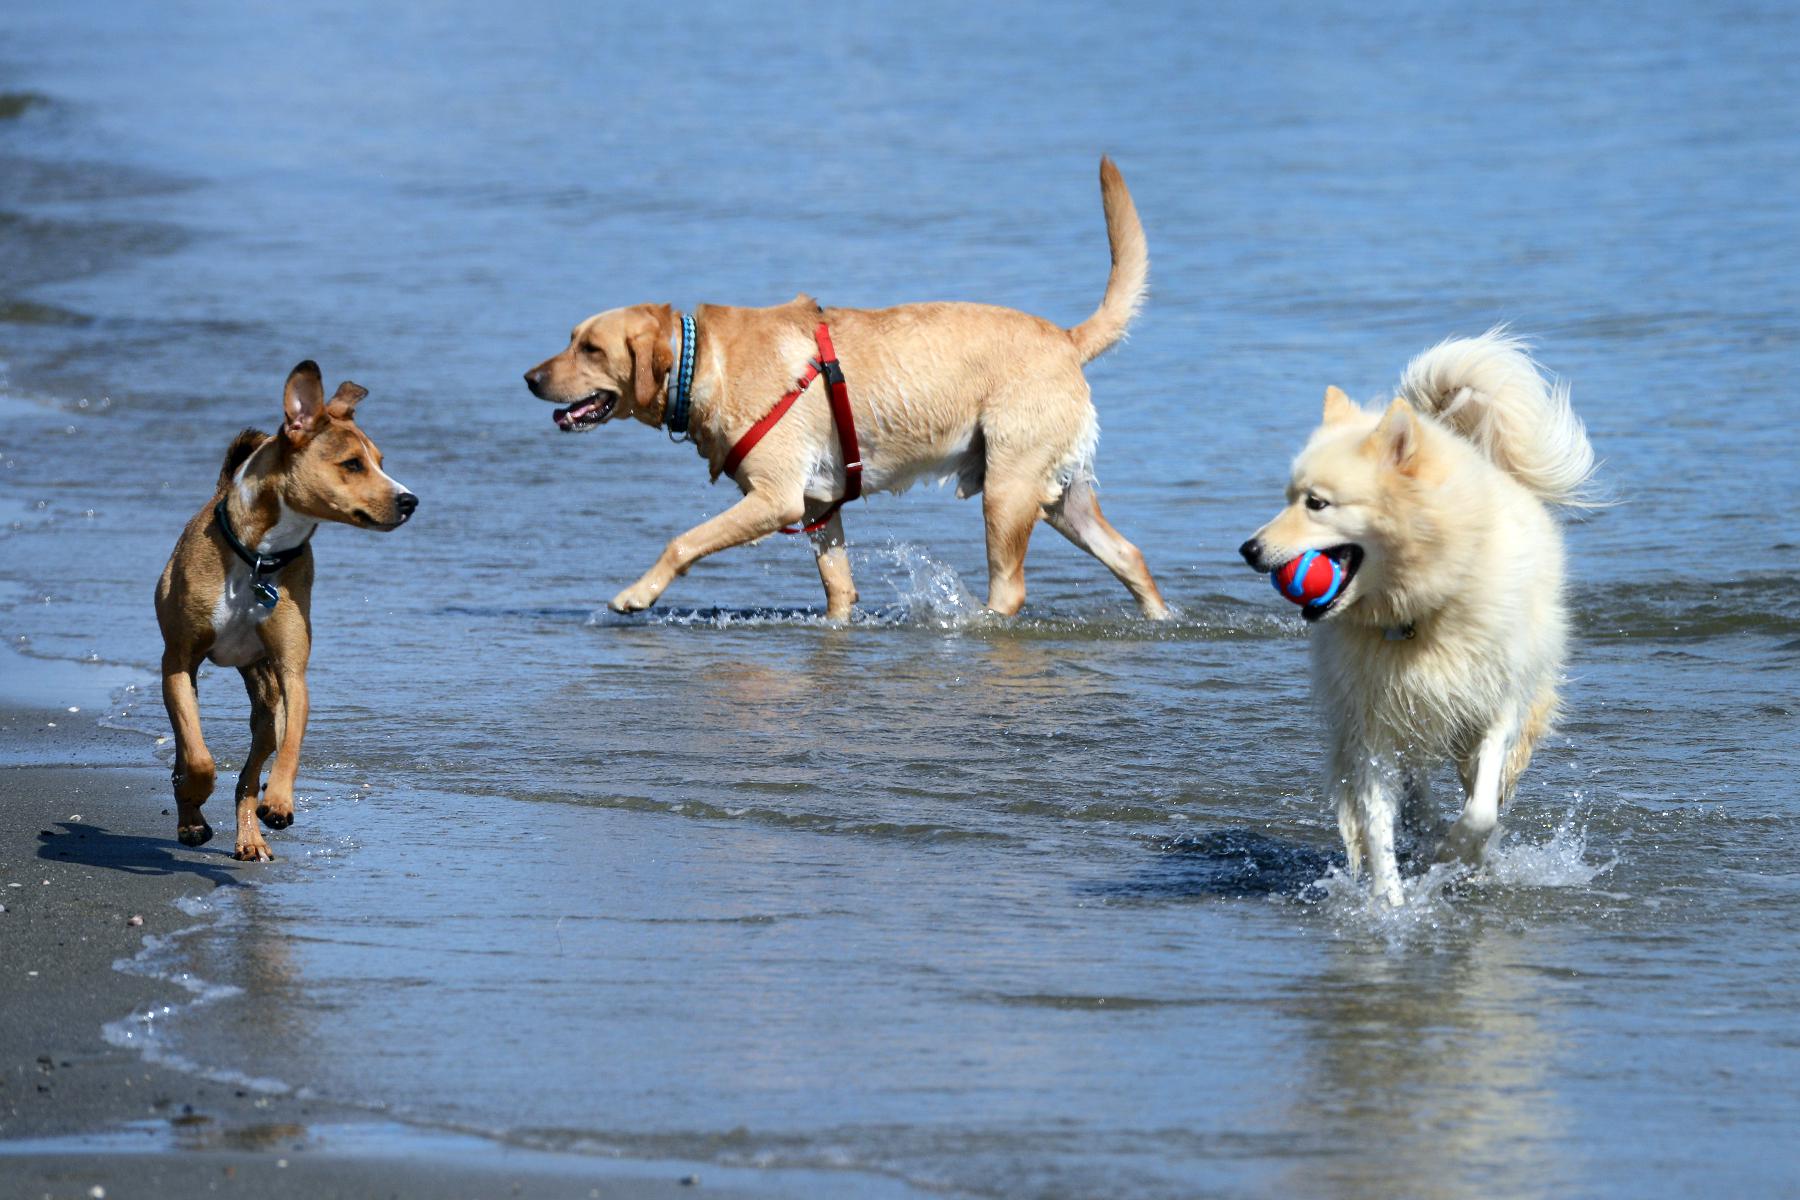 What to know about bringing your dogs to the beach in CT